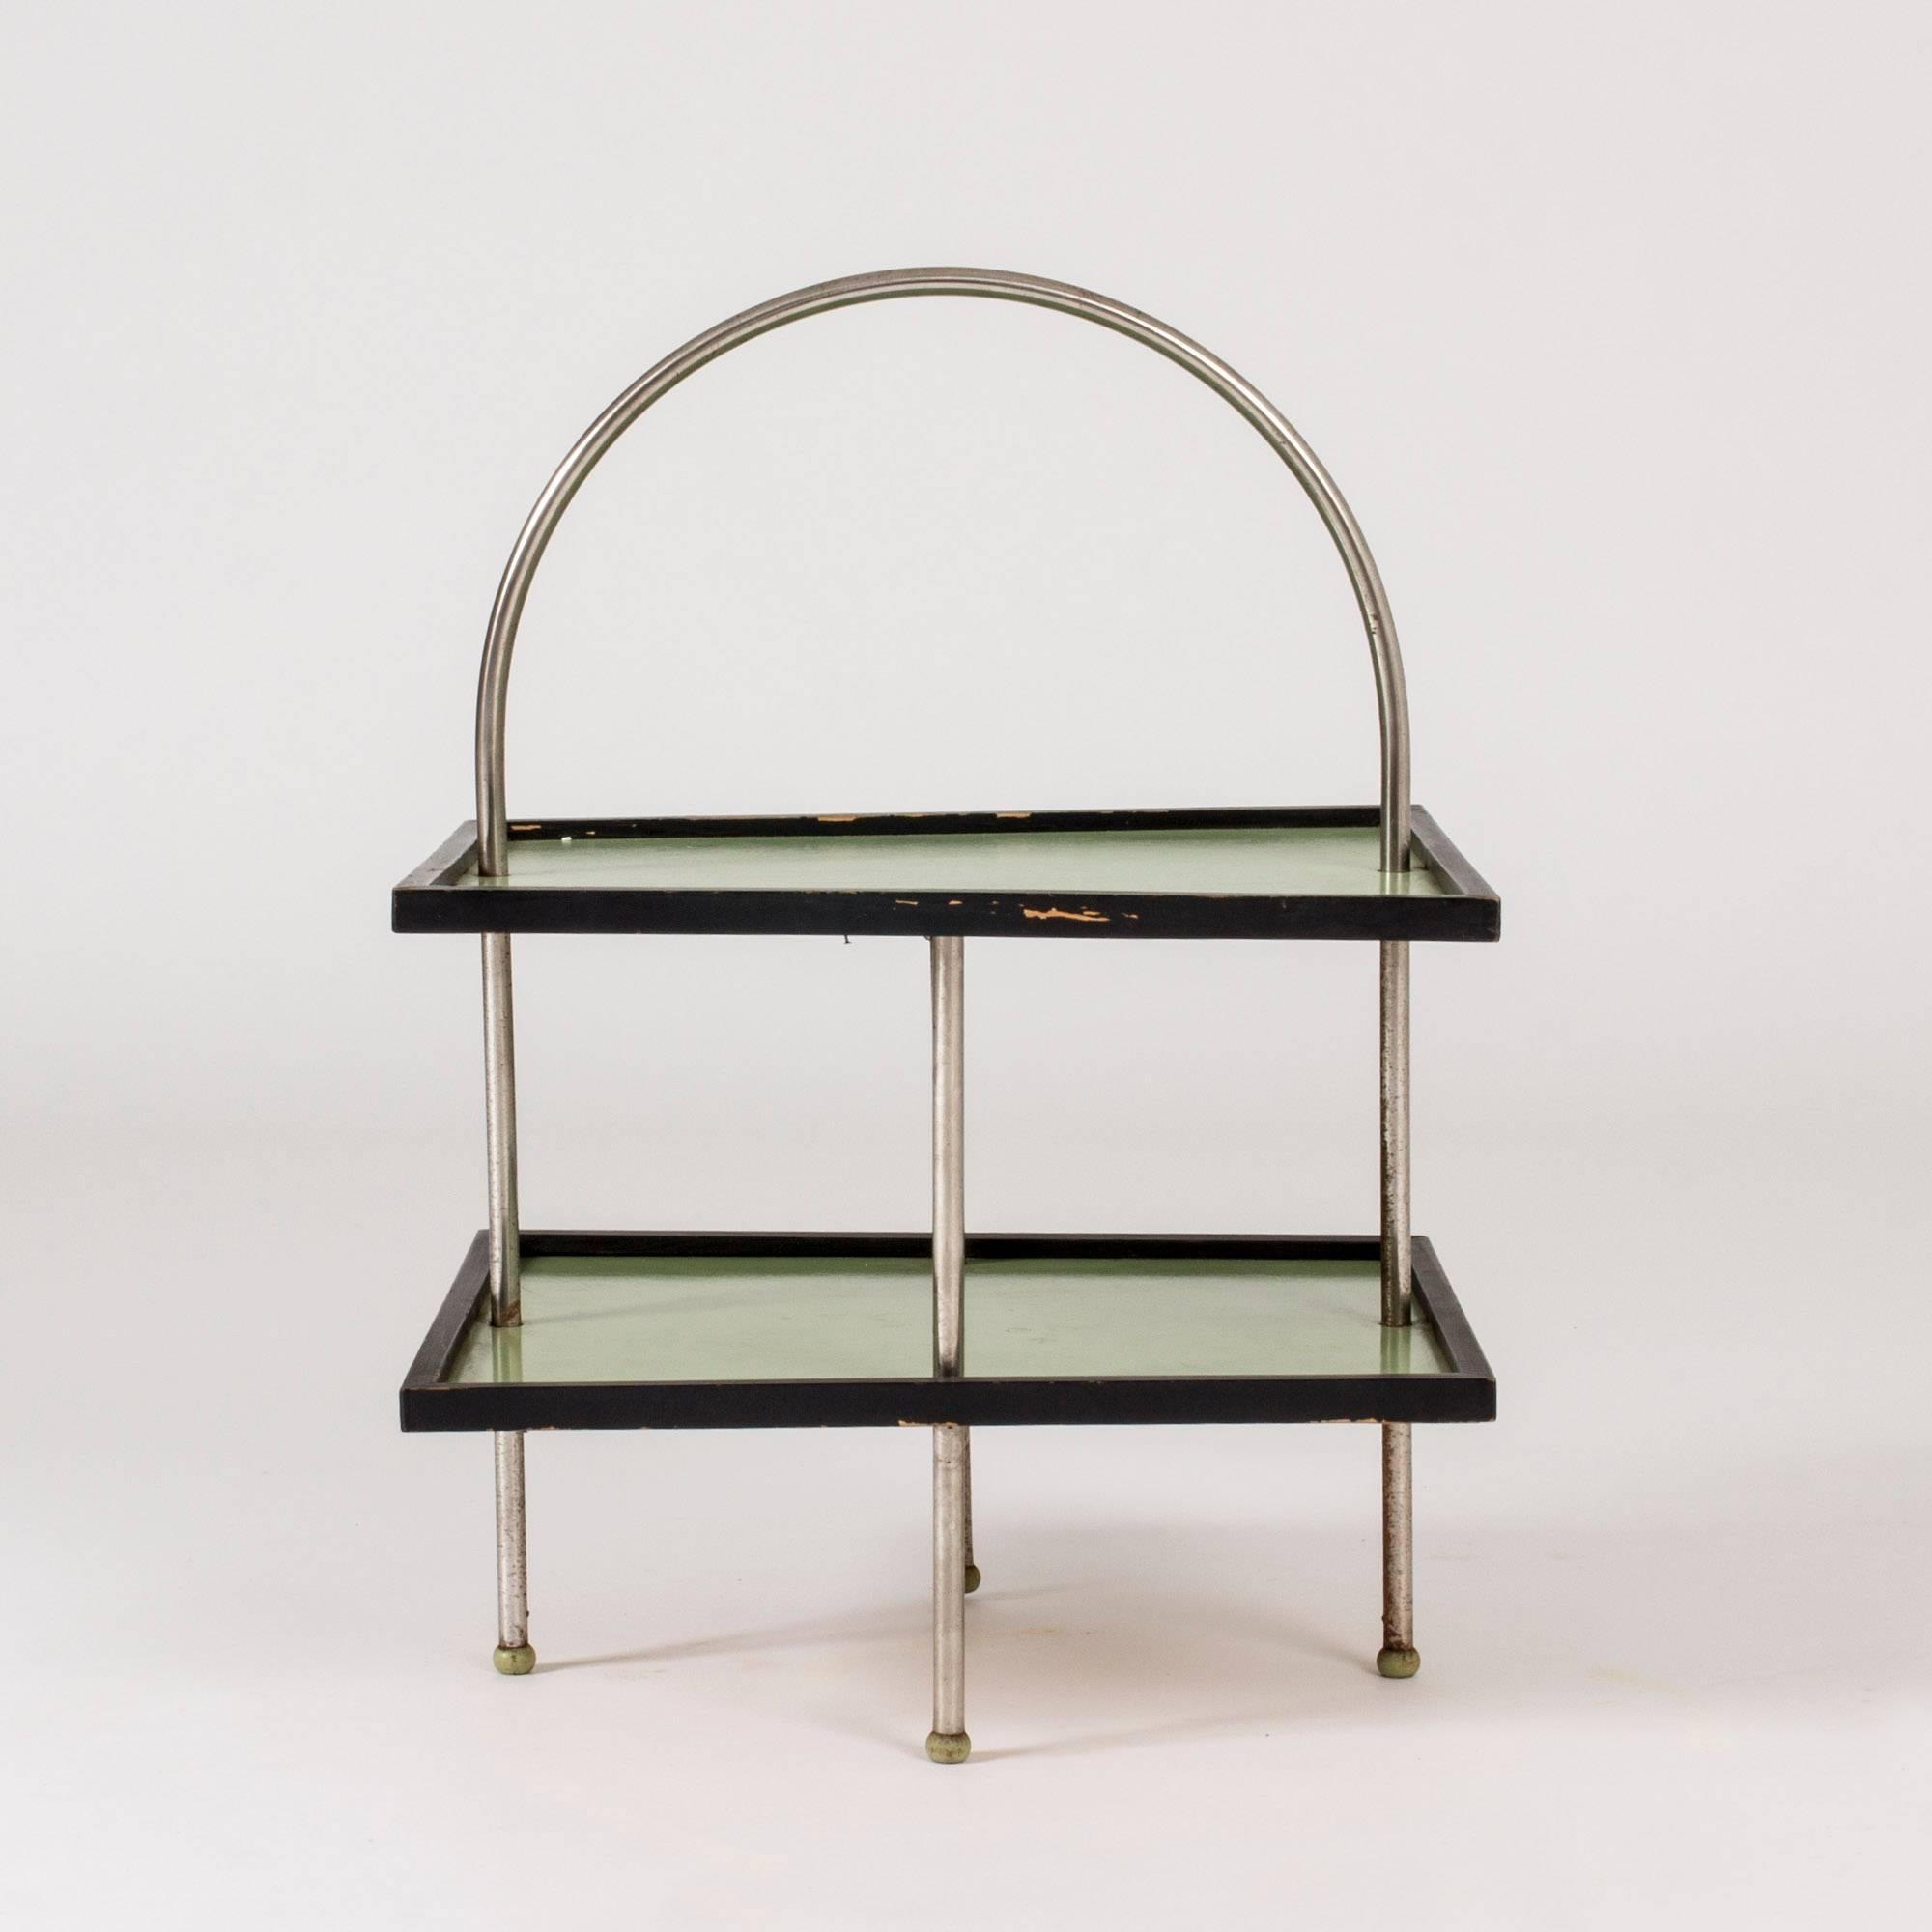 Neat Swedish functionalist side table with light graphic lines, made from metal and green and black lacquered wood. Easy to pick up and move around.